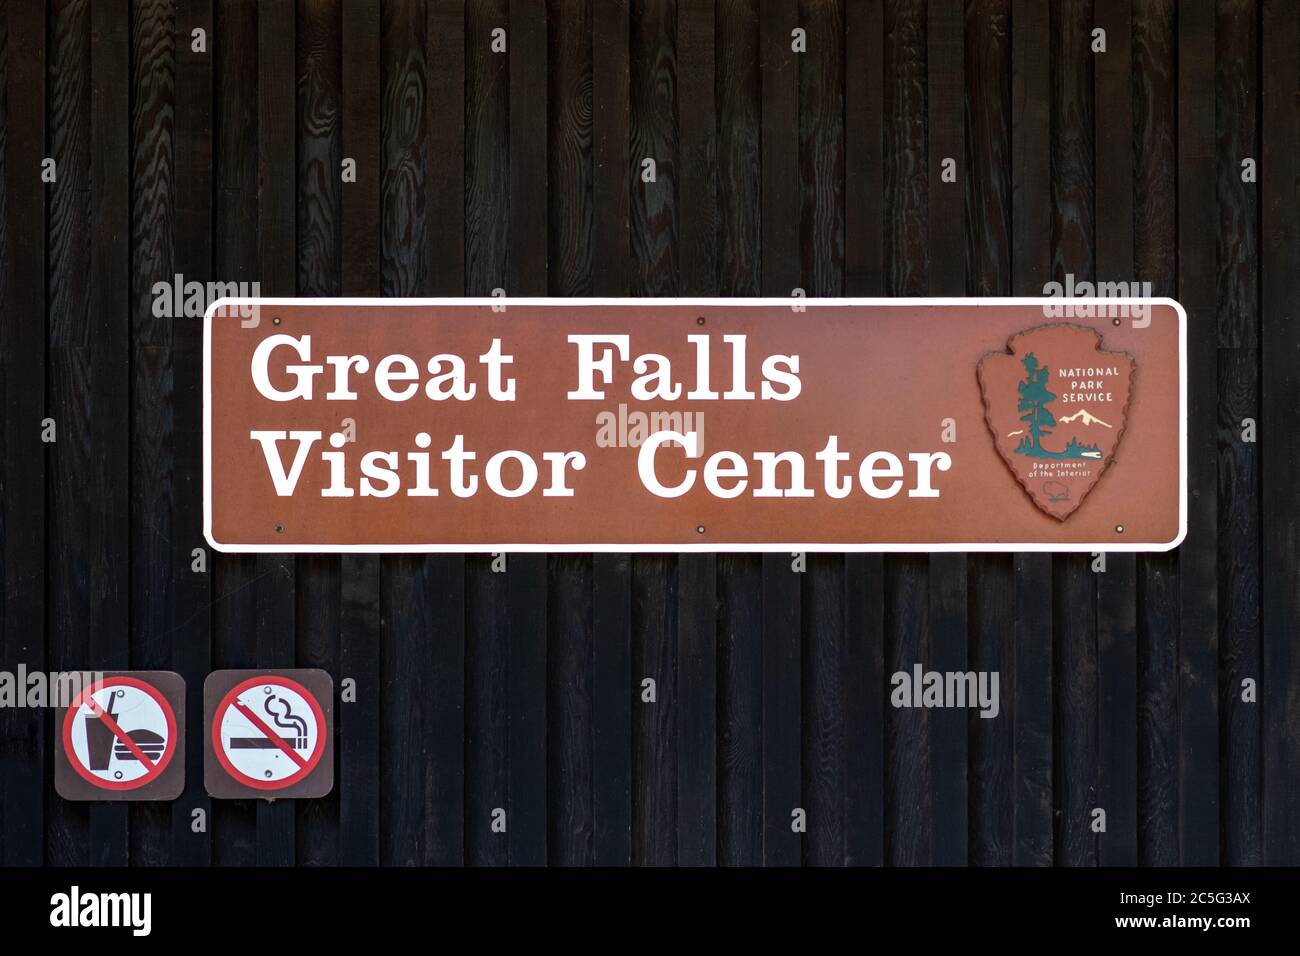 McLean, Virginia / USA - July 2 2020: Sign outside of the Great Falls Visitor Center. National Park Service site in McLean, Fairfax County, Virginia. Stock Photo